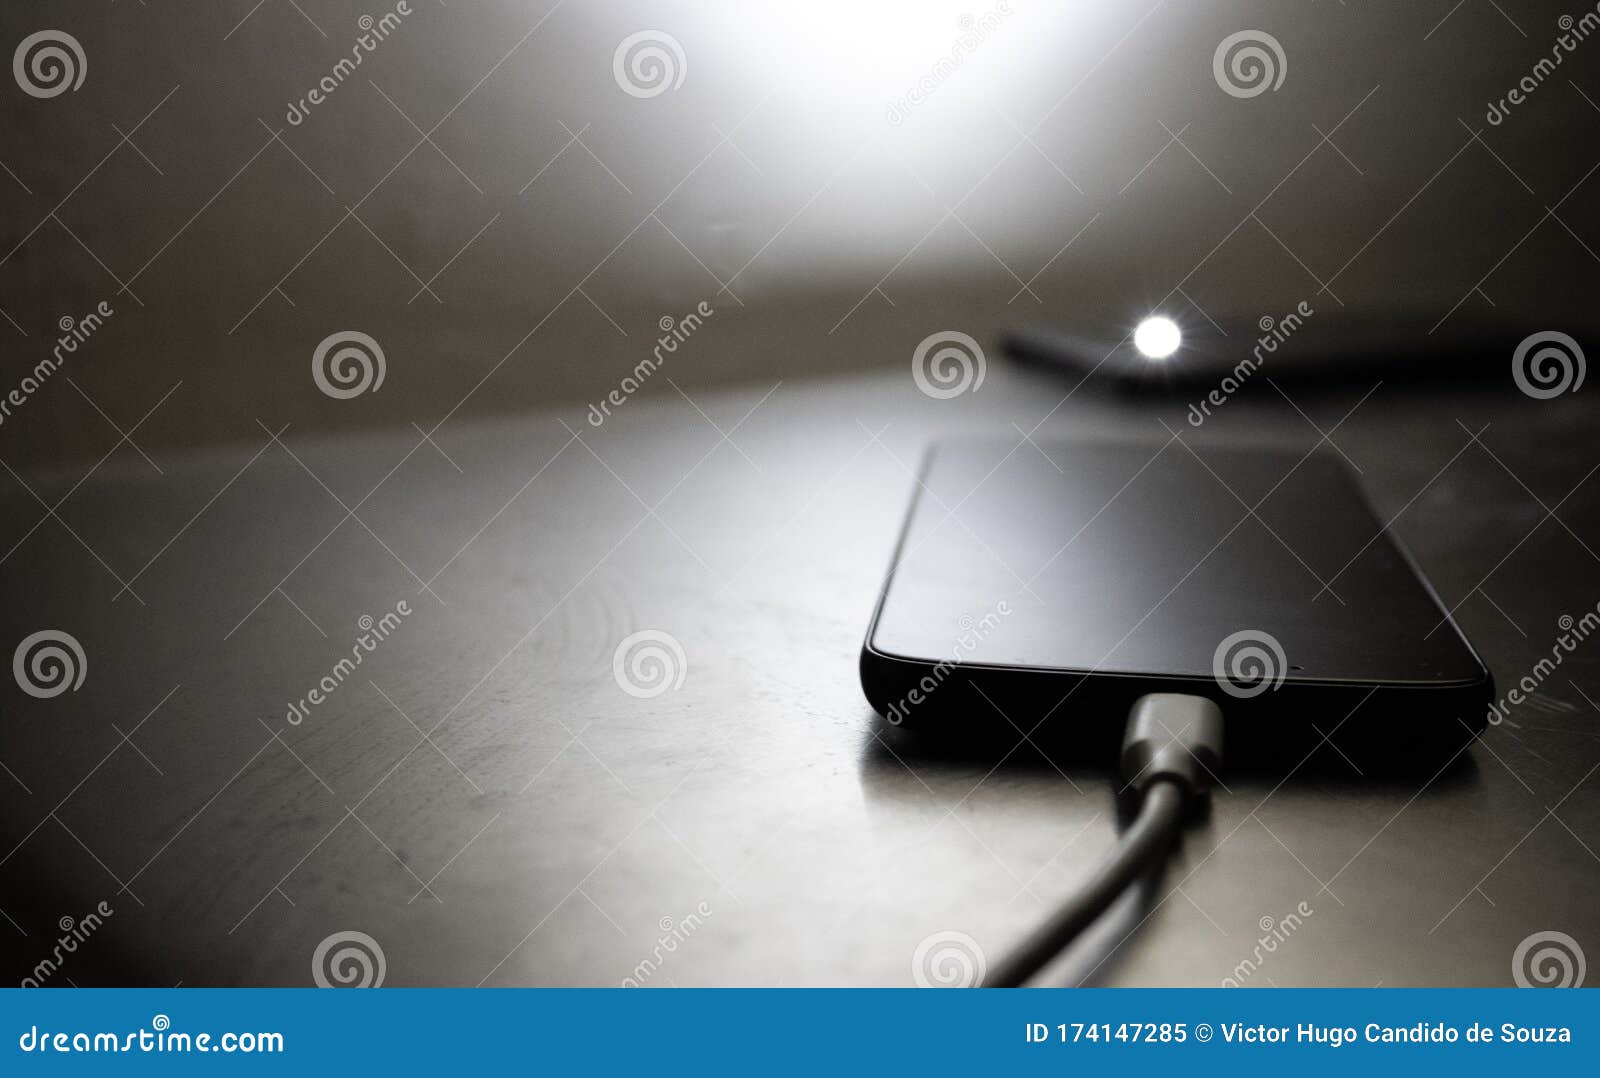 Smartphone Charging The Battery On A Desk Stock Image Image Of